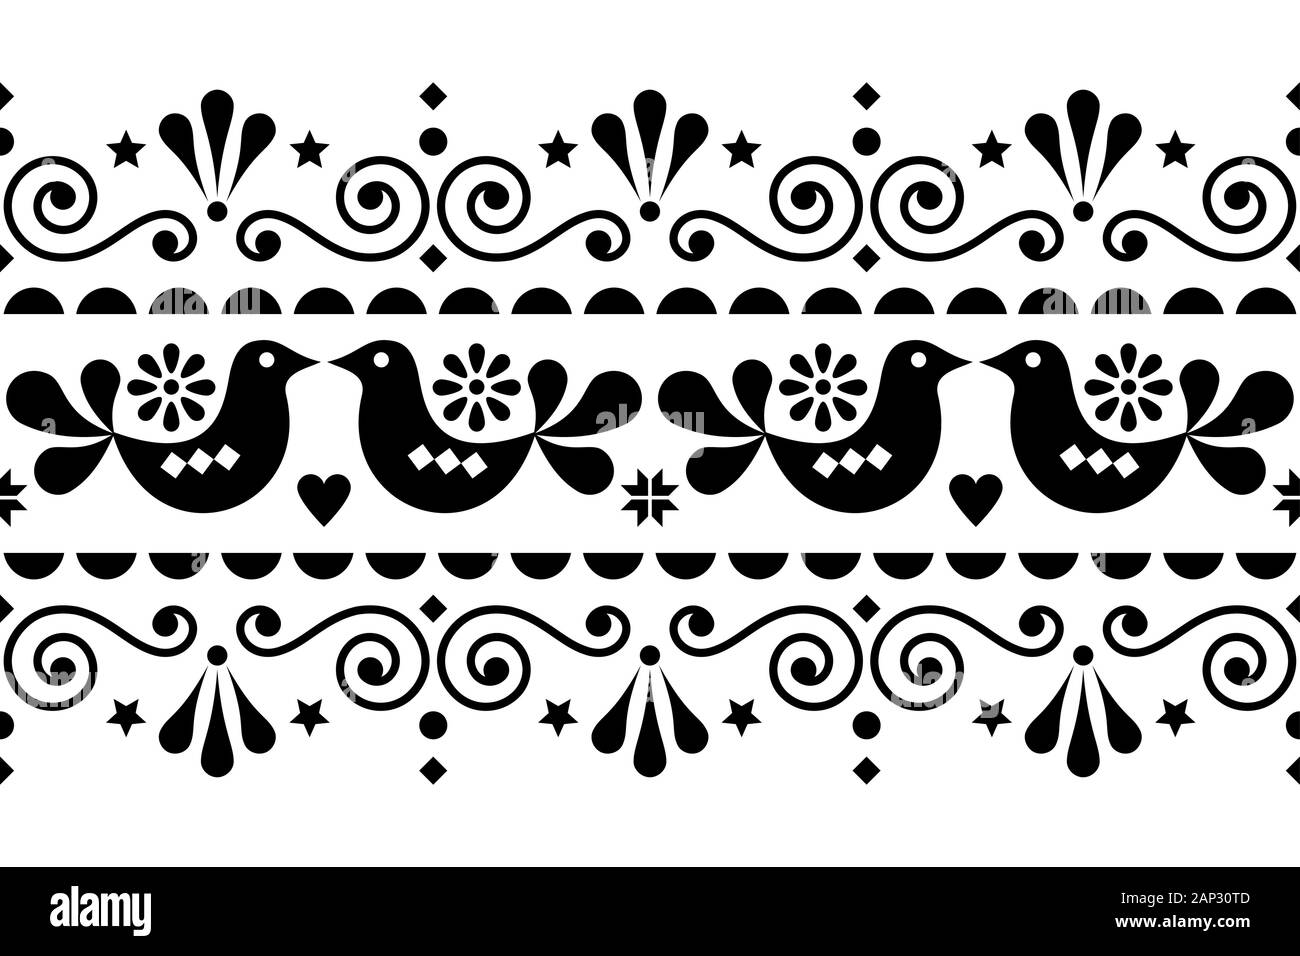 Scandinavian folk seamless vector long pattern, repetitive floral cute Nordic design with birds in black on white background Stock Vector